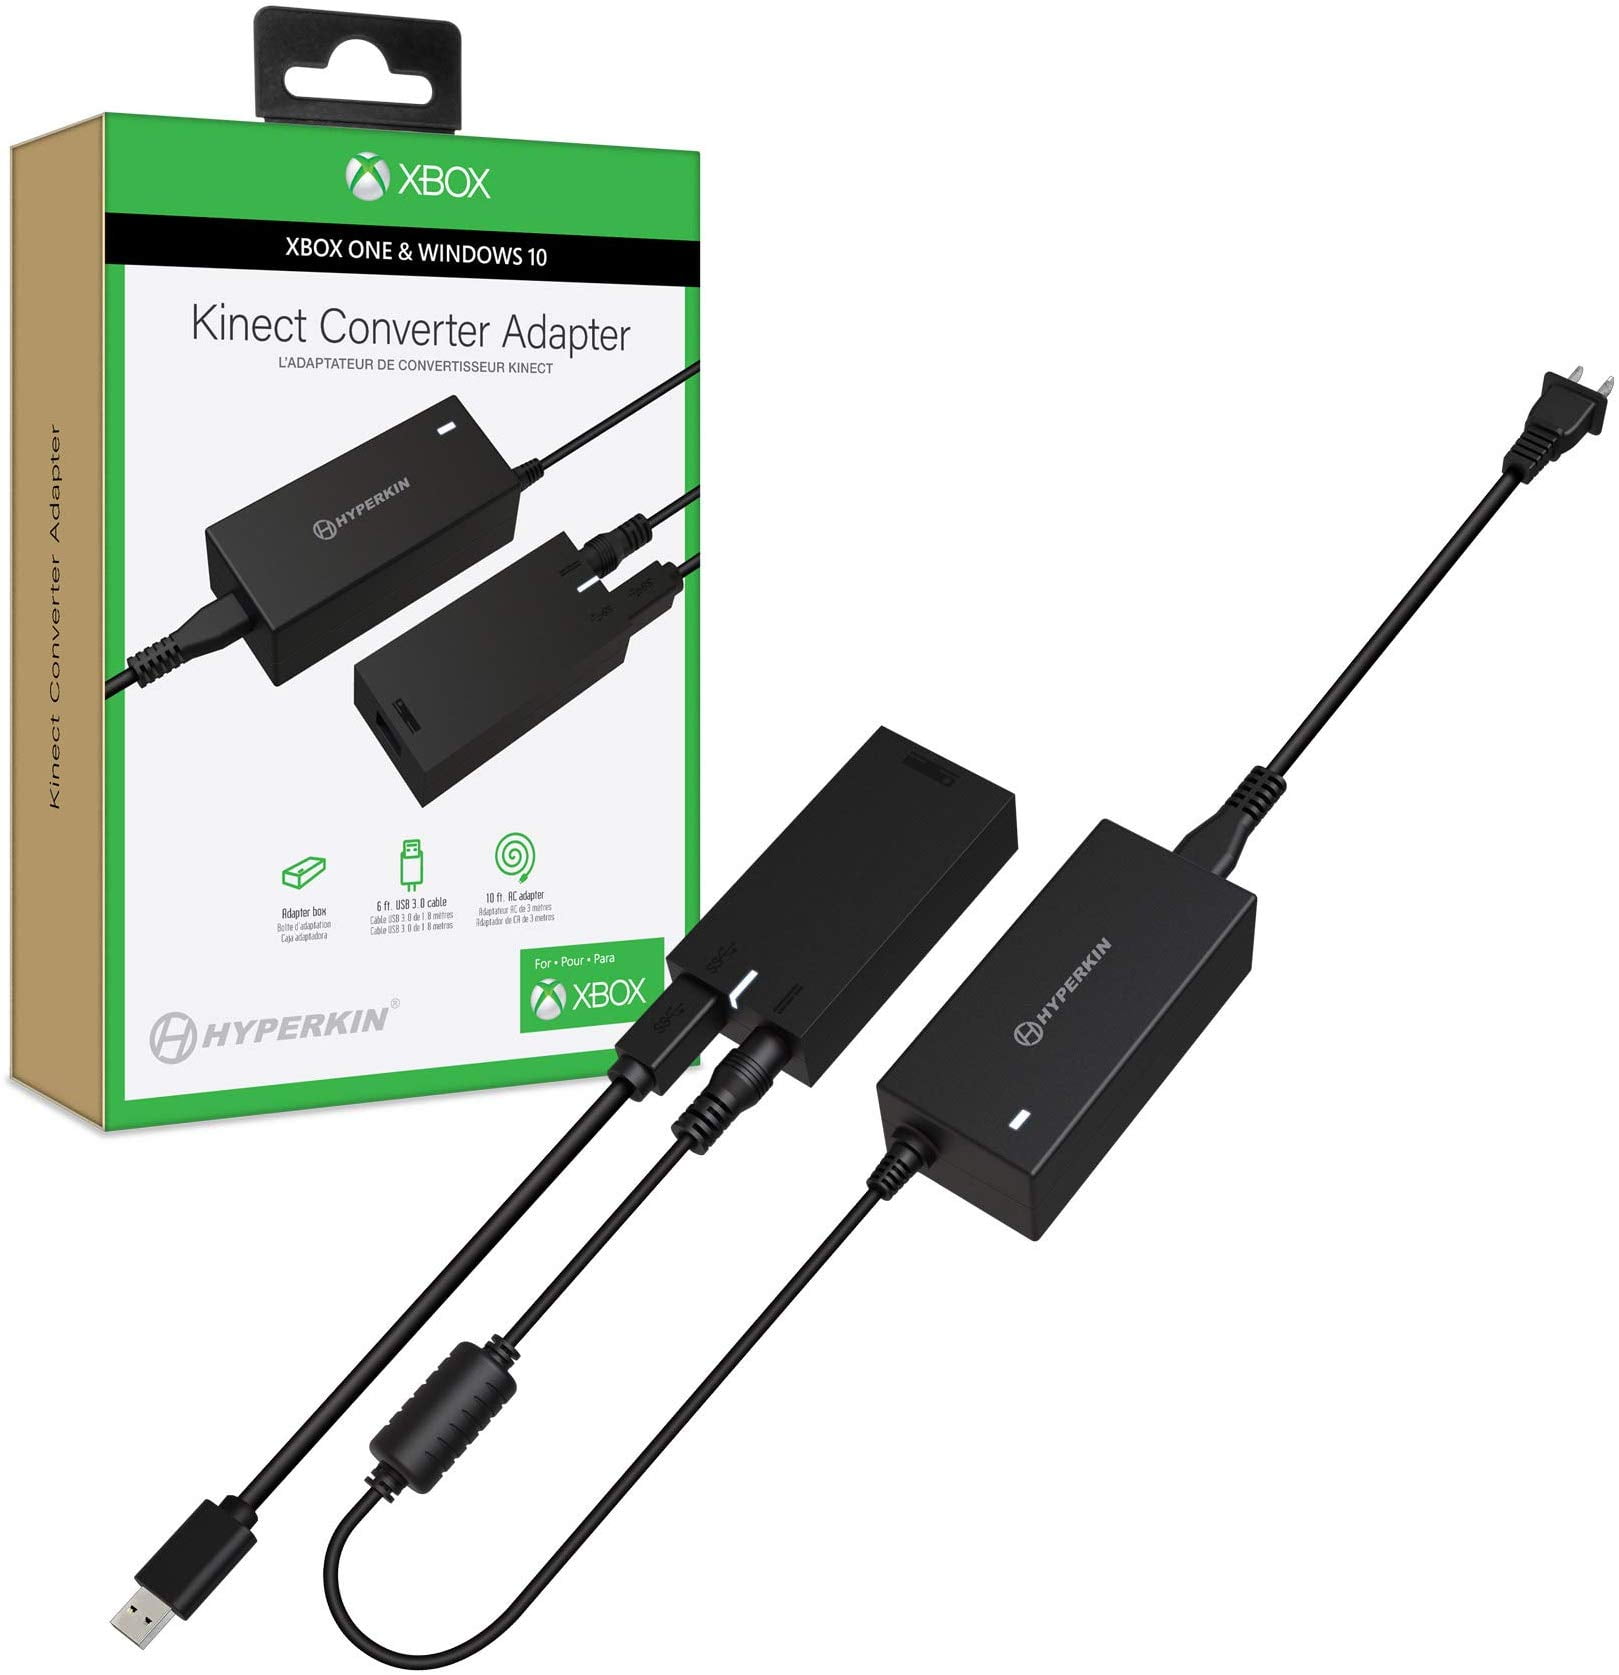 Do i need a kinect adapter for xbox one s Hyperkin Kinect Converter Adapter For Xbox One S Xbox One X And Windows 10 Pcs Officially Licensed By Xbox Walmart Com Walmart Com